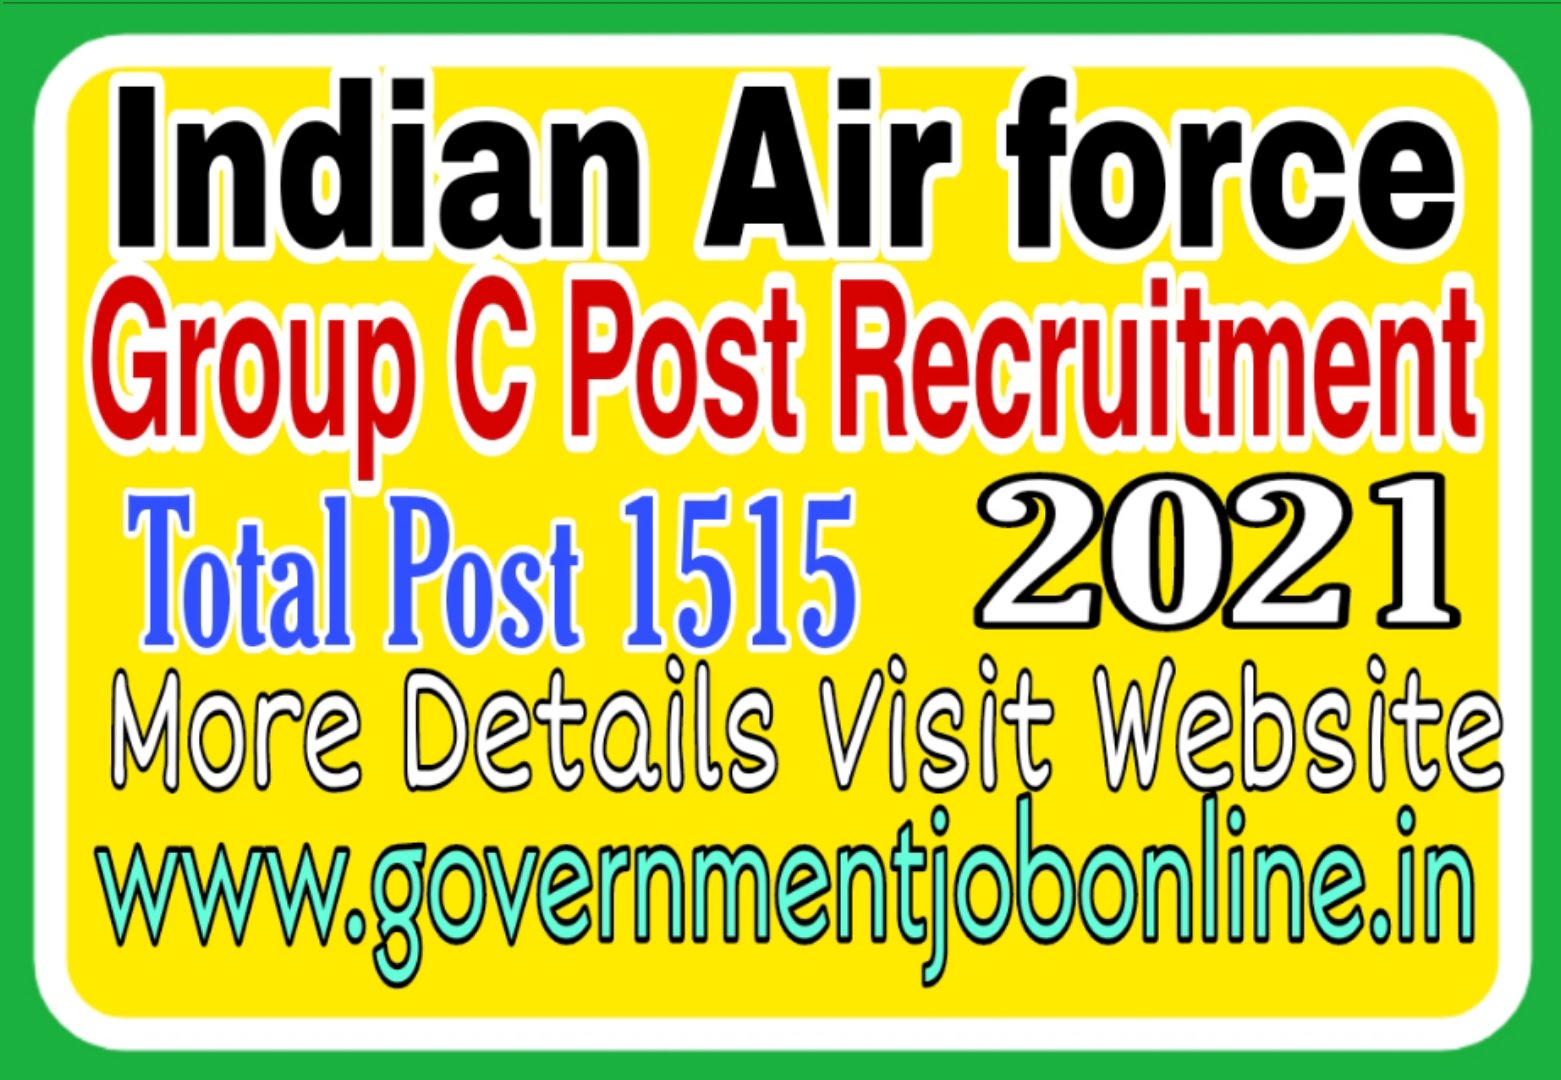 Indian Airforce Group C Post Recruitment 2021